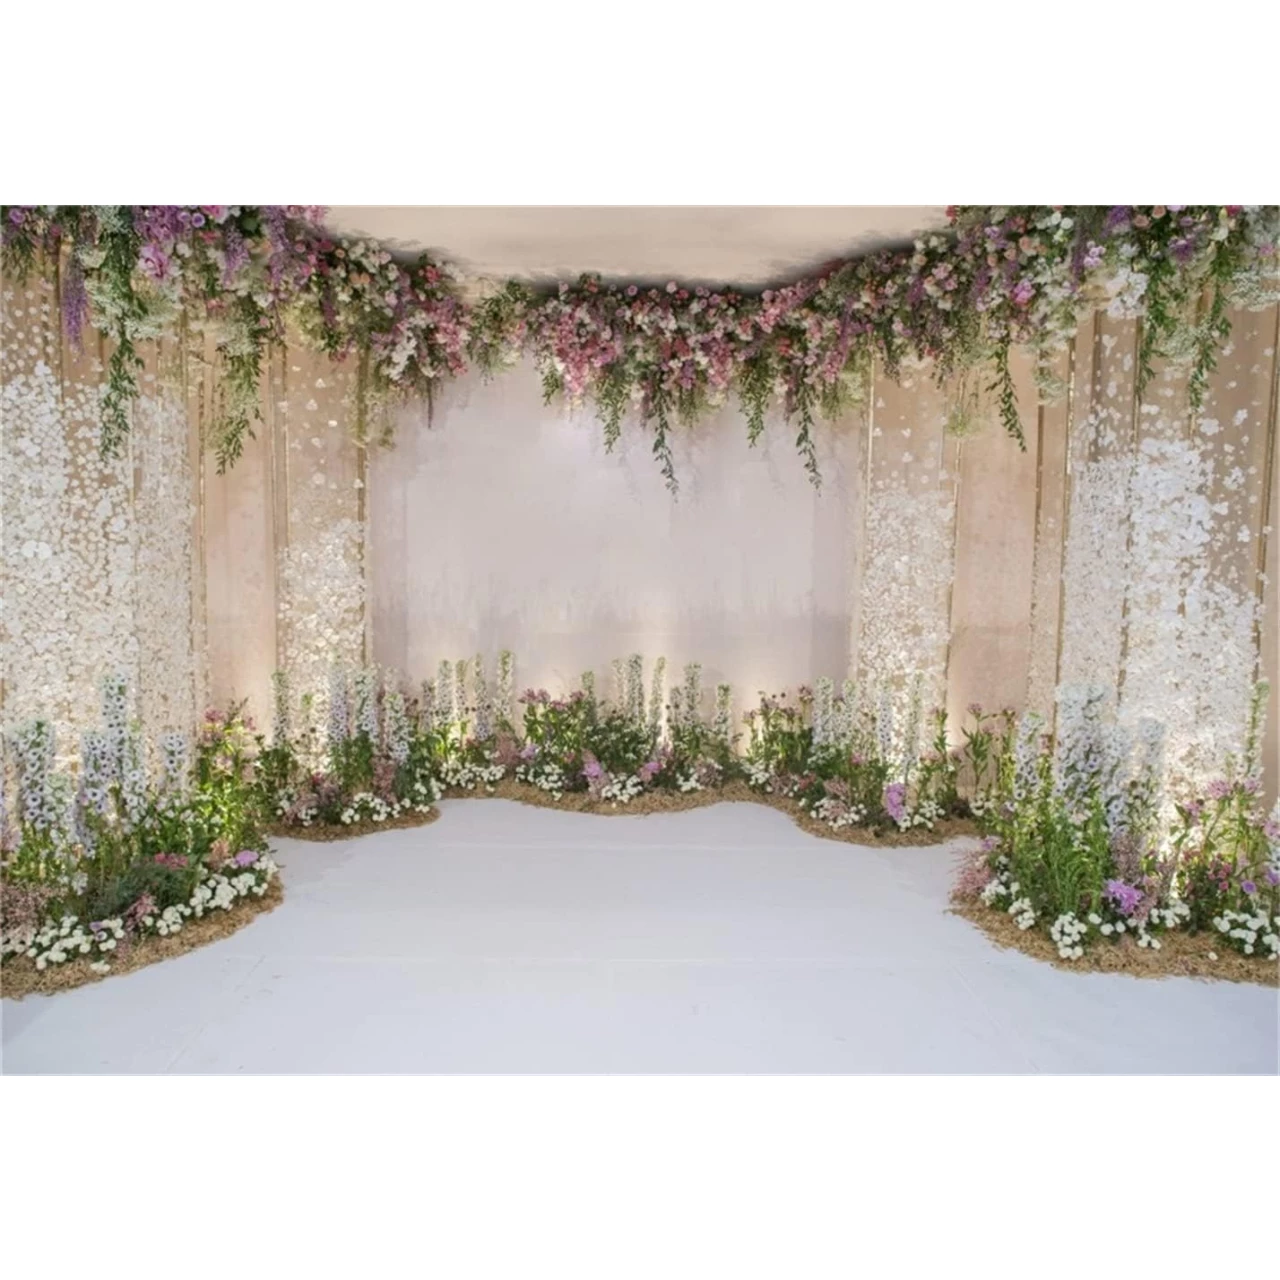 CSFOTO 10x7ft Wedding Backdrop for Cradle Ceremony Backdrop for Proposal Flowers Curtain Banner Bridal Shower Background Mother&rsquo;s Day Floral Marriage Backdrop